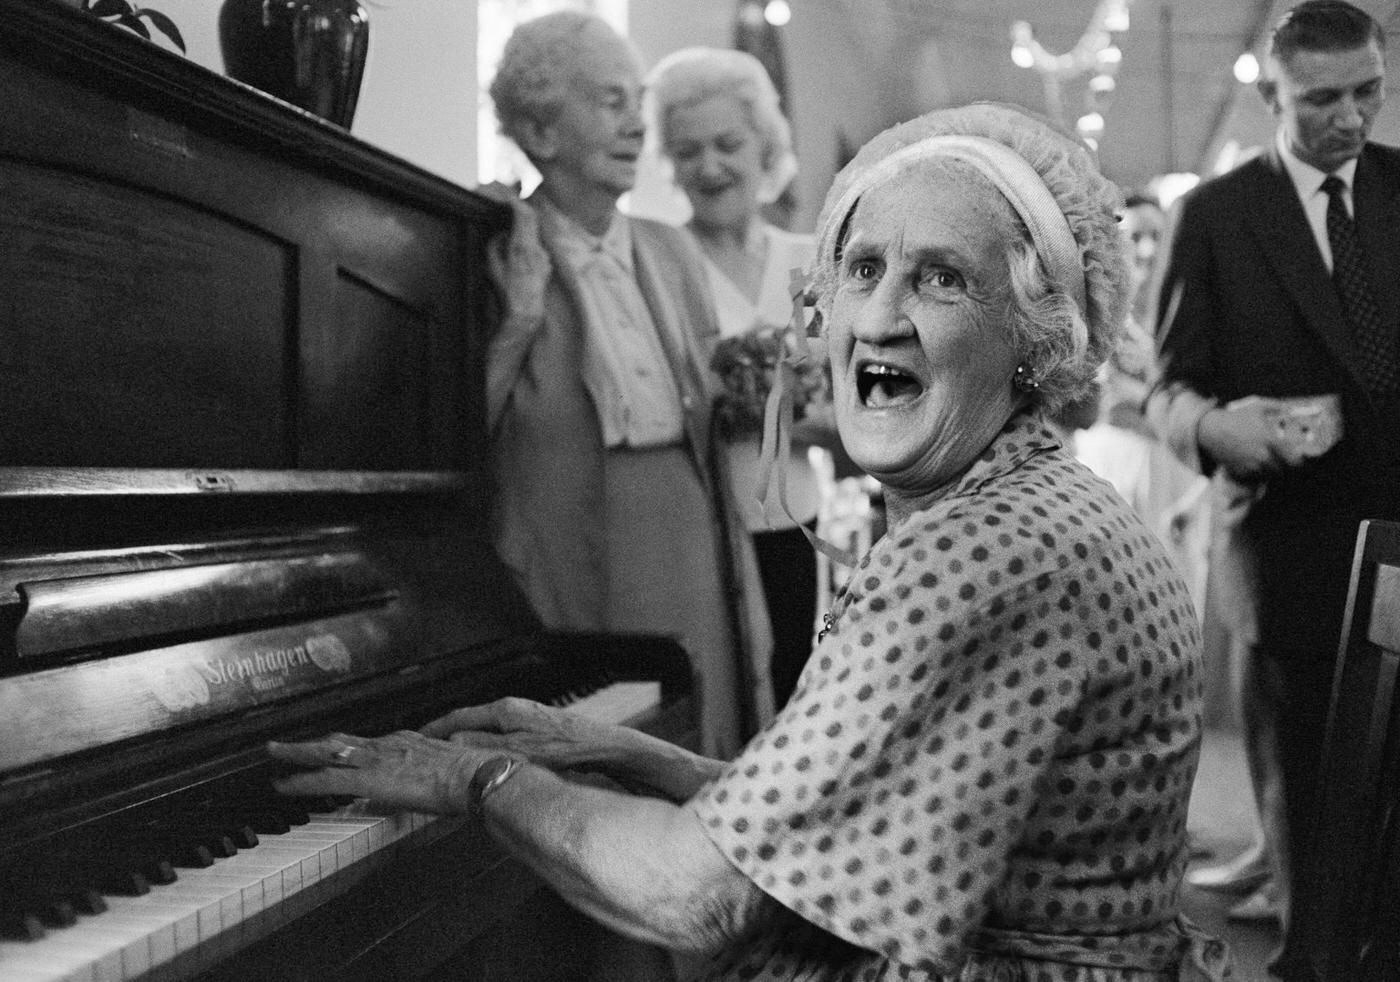 A Christmas party at a retirement home in South Africa, 1950s.